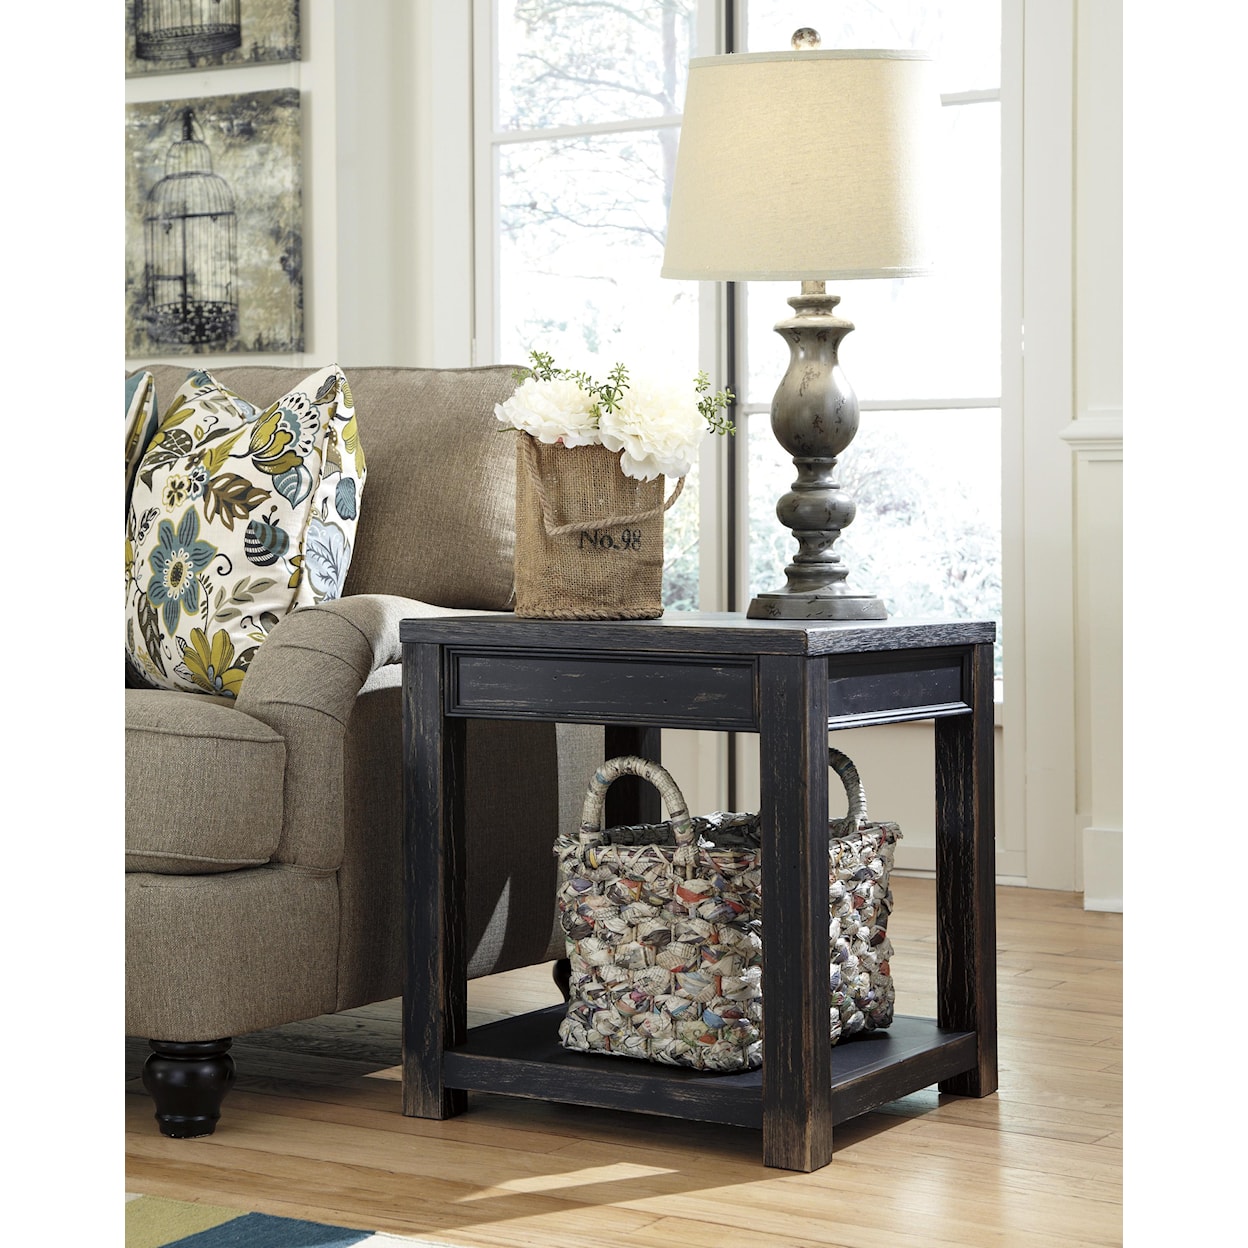 Signature Design by Ashley Furniture Gavelston Square End Table